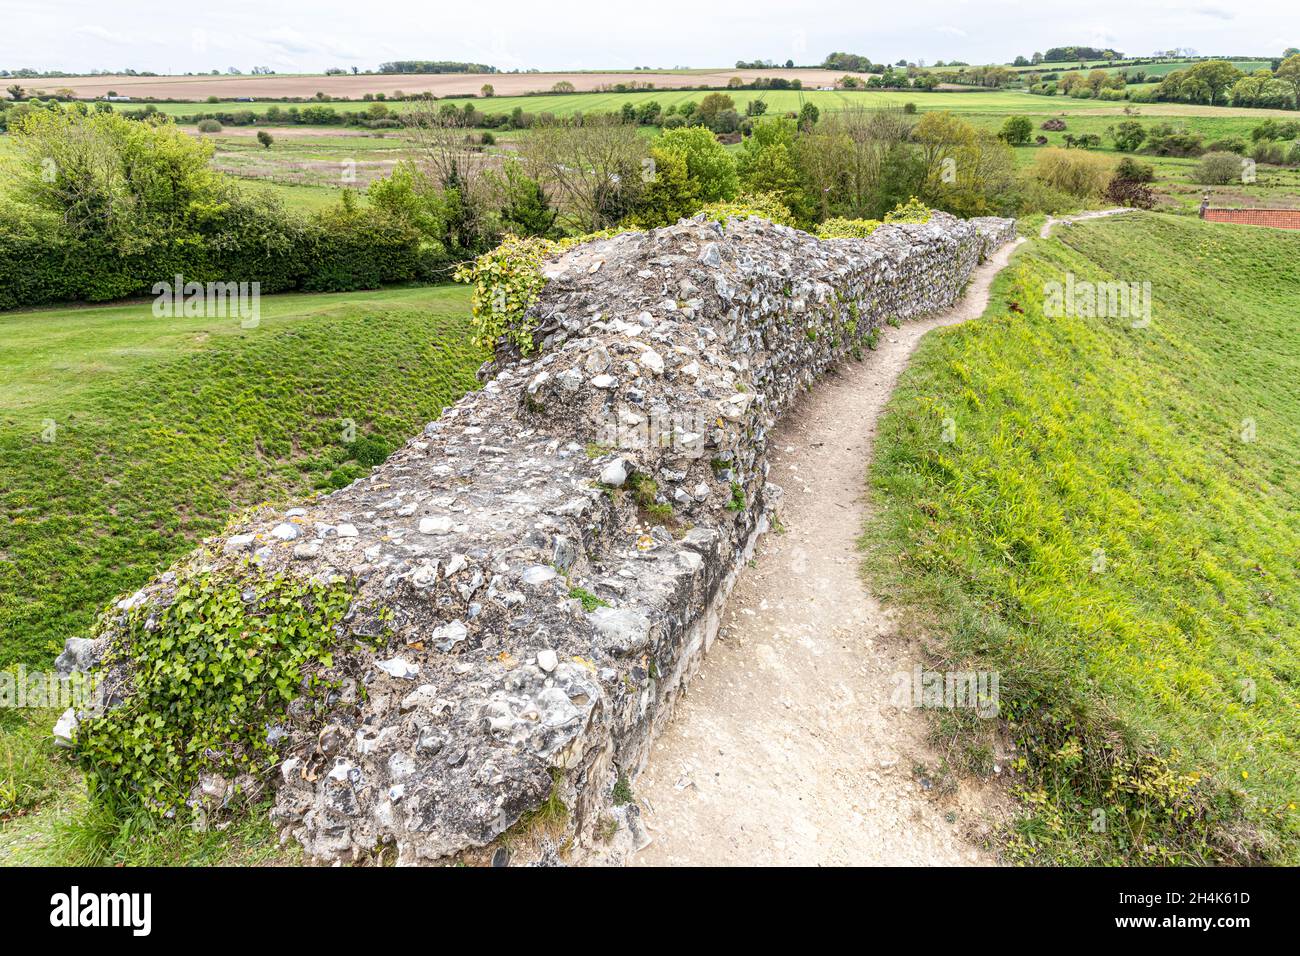 Part of the flint rubble masonry wall of the outer bailey at the medieval castle at Castle Acre, Norfolk UK Stock Photo